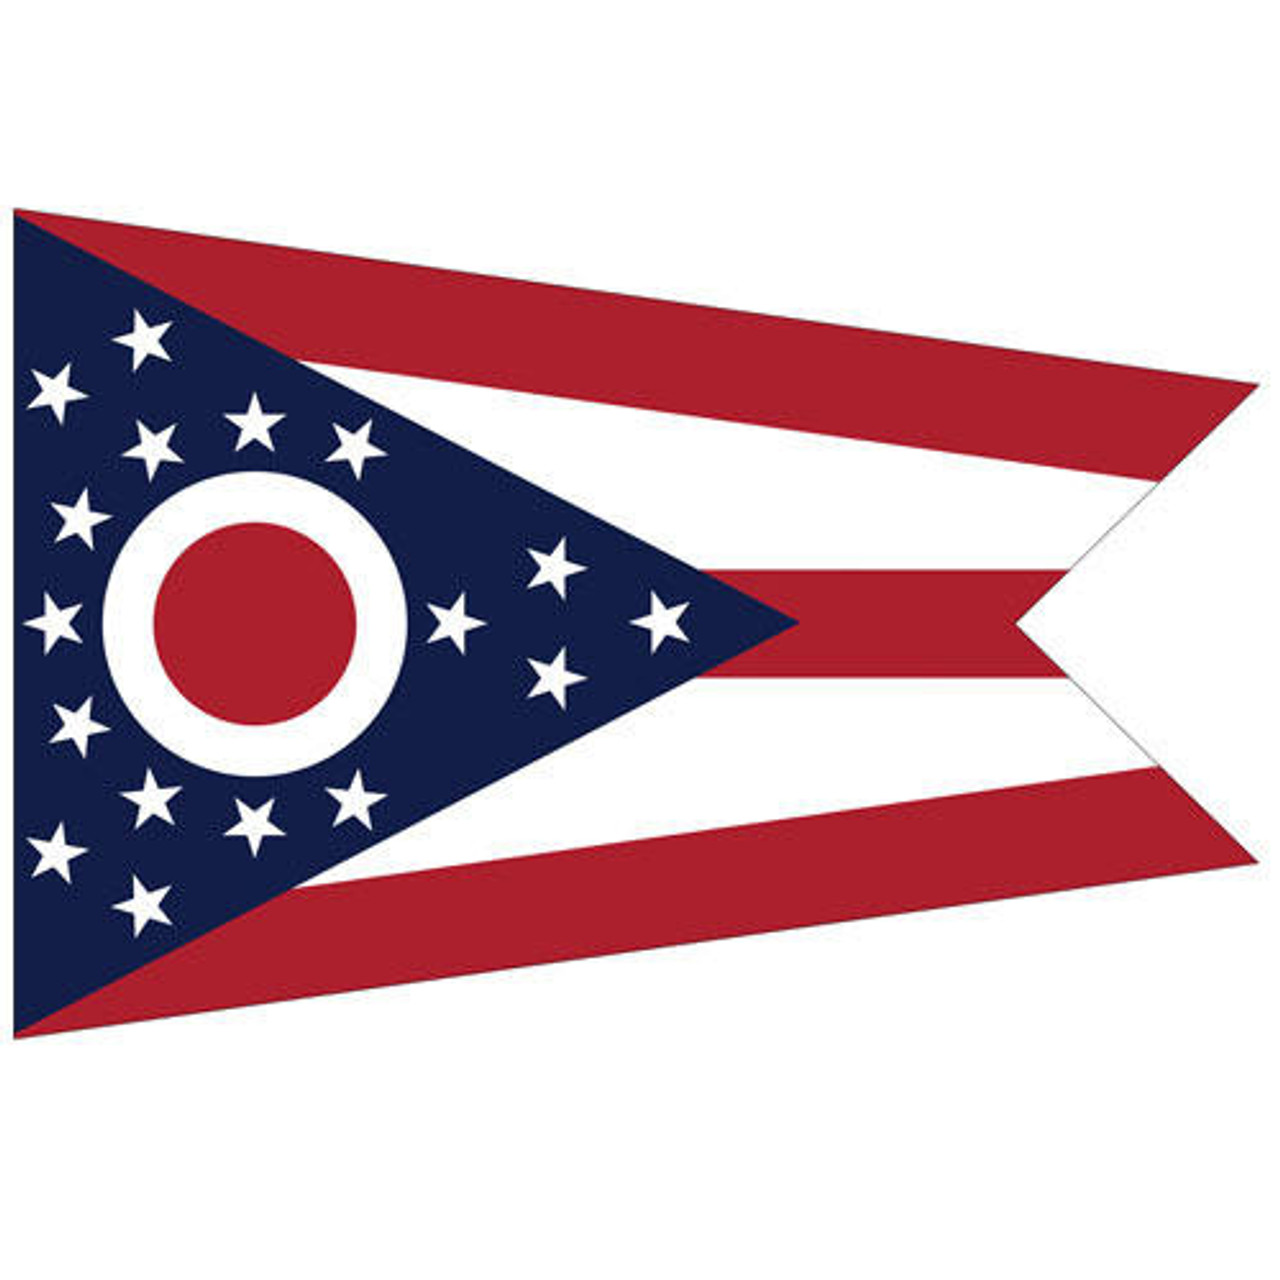 Buy Ohio State Flag - 6'W x 4'H, Outdoor Nylon  Shiffler - Furniture,  Fixtures and Equipment for Schools